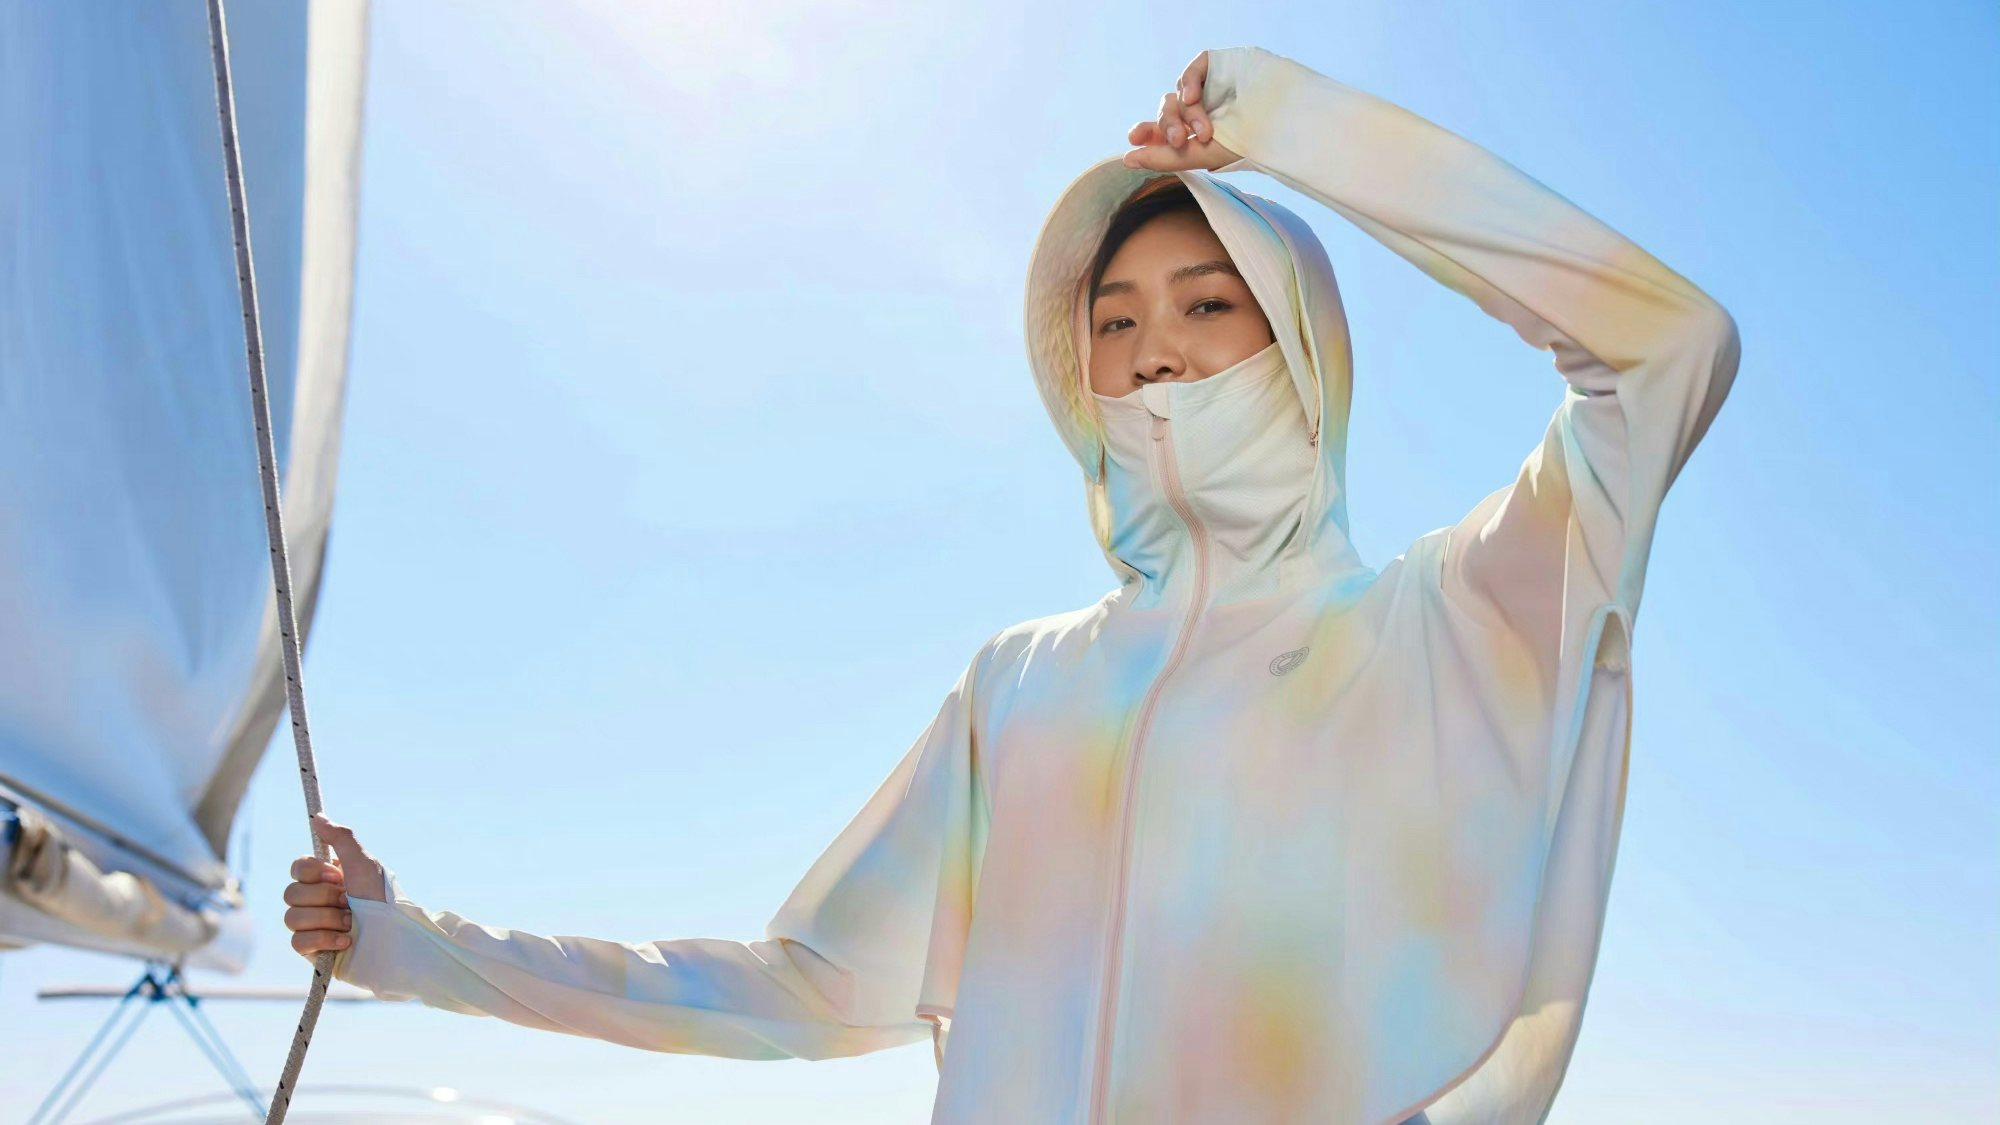 As temperatures this summer hit record highs, Western consumers are slowly adopting the sun protection measures that have been commonplace in Asia for years. Photo: Bosideng